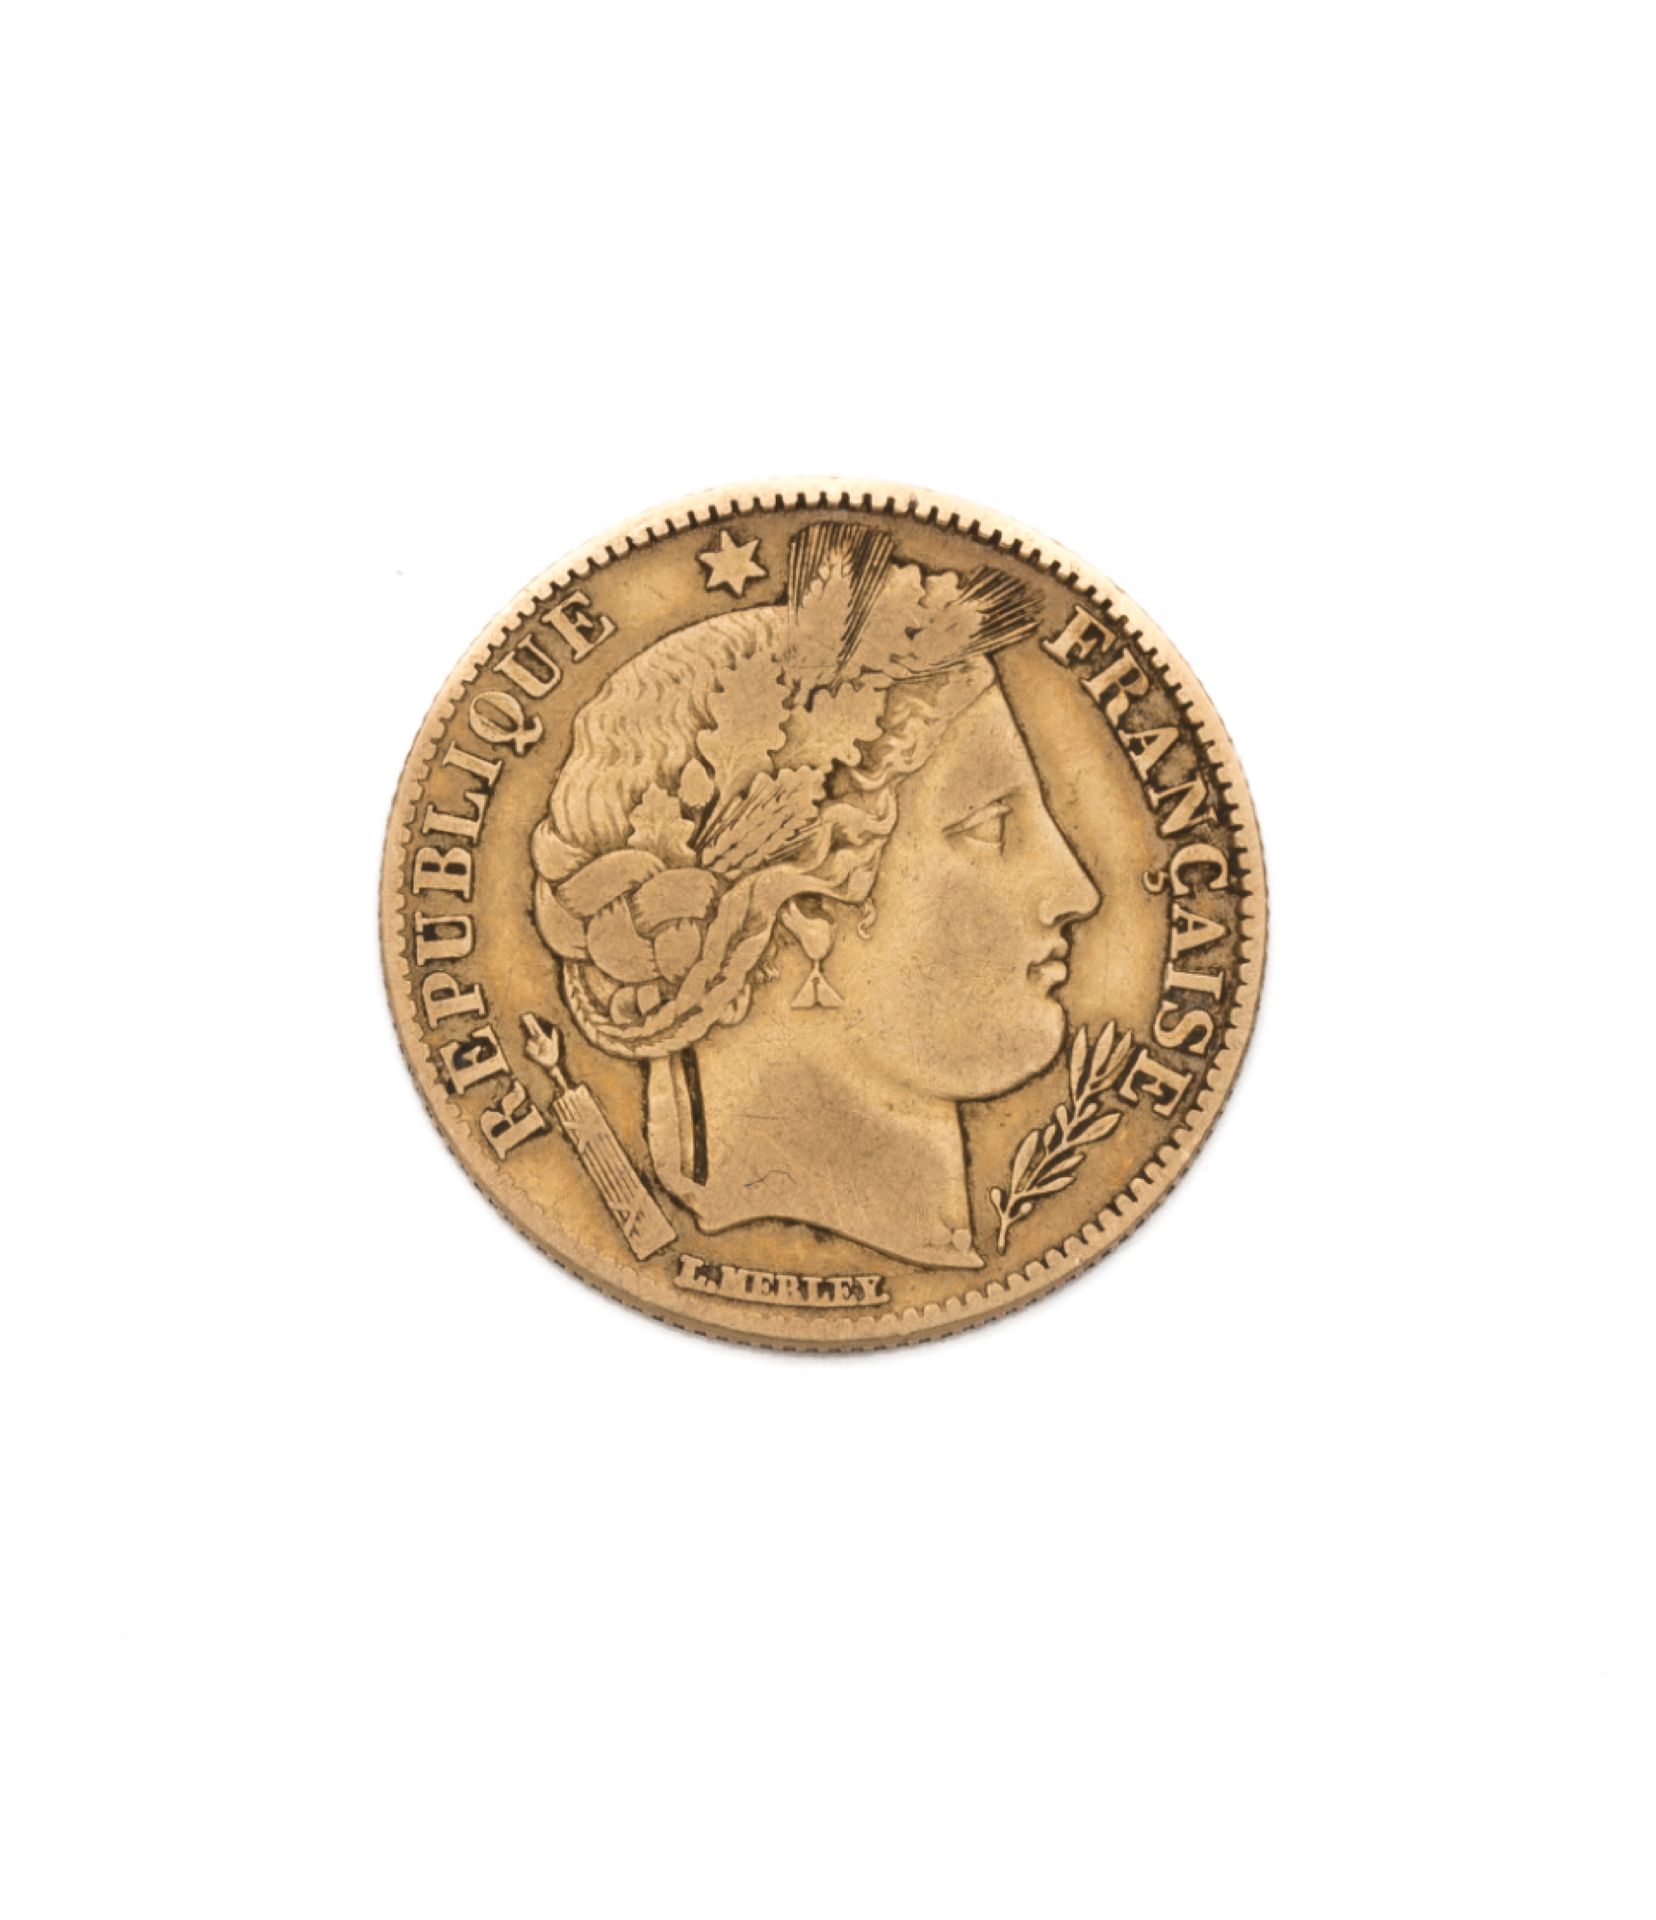 Null Second Republic
10 franc gold, Ceres. 1851 A
Weight : 3,15 g